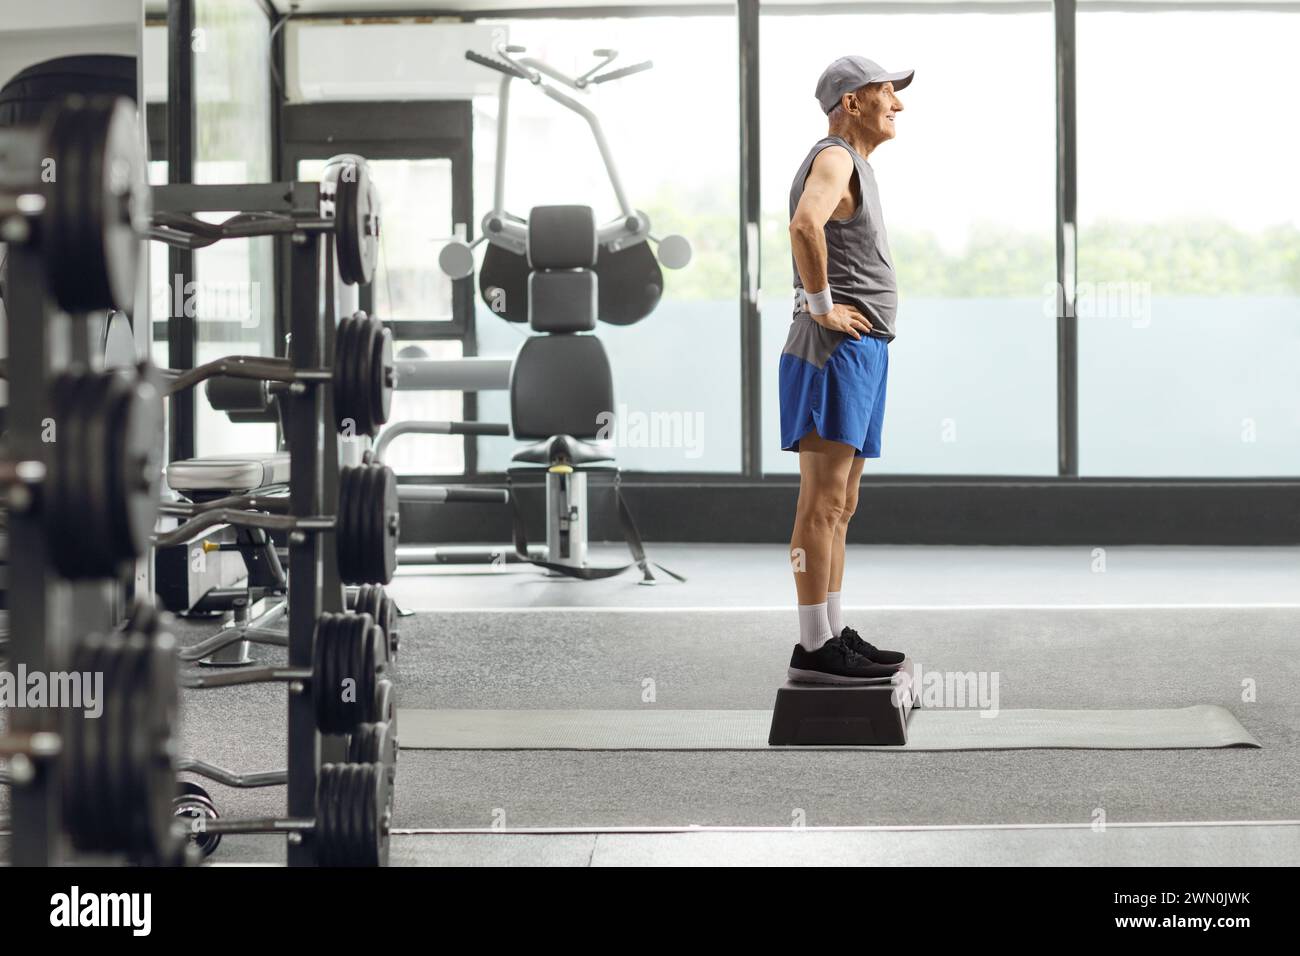 Full length profile shot of an elderly man at a gym standing on a step aerobic platform Stock Photo